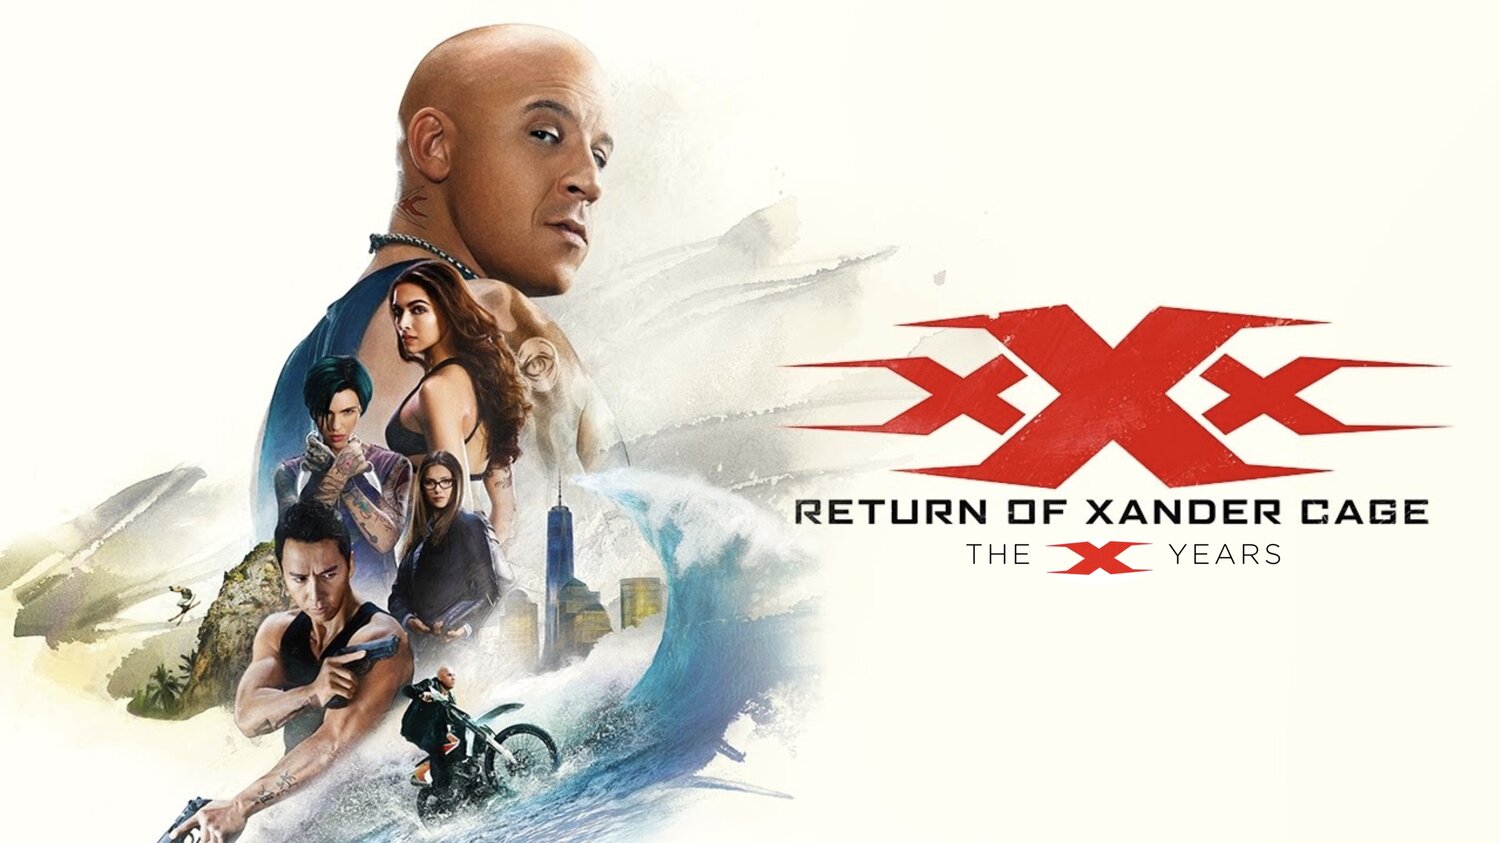 XXX: Return of Xander Cage Sequel To Fast X Part 2: Vin Diesel’s Upcoming Anticipated Movies - NEWS